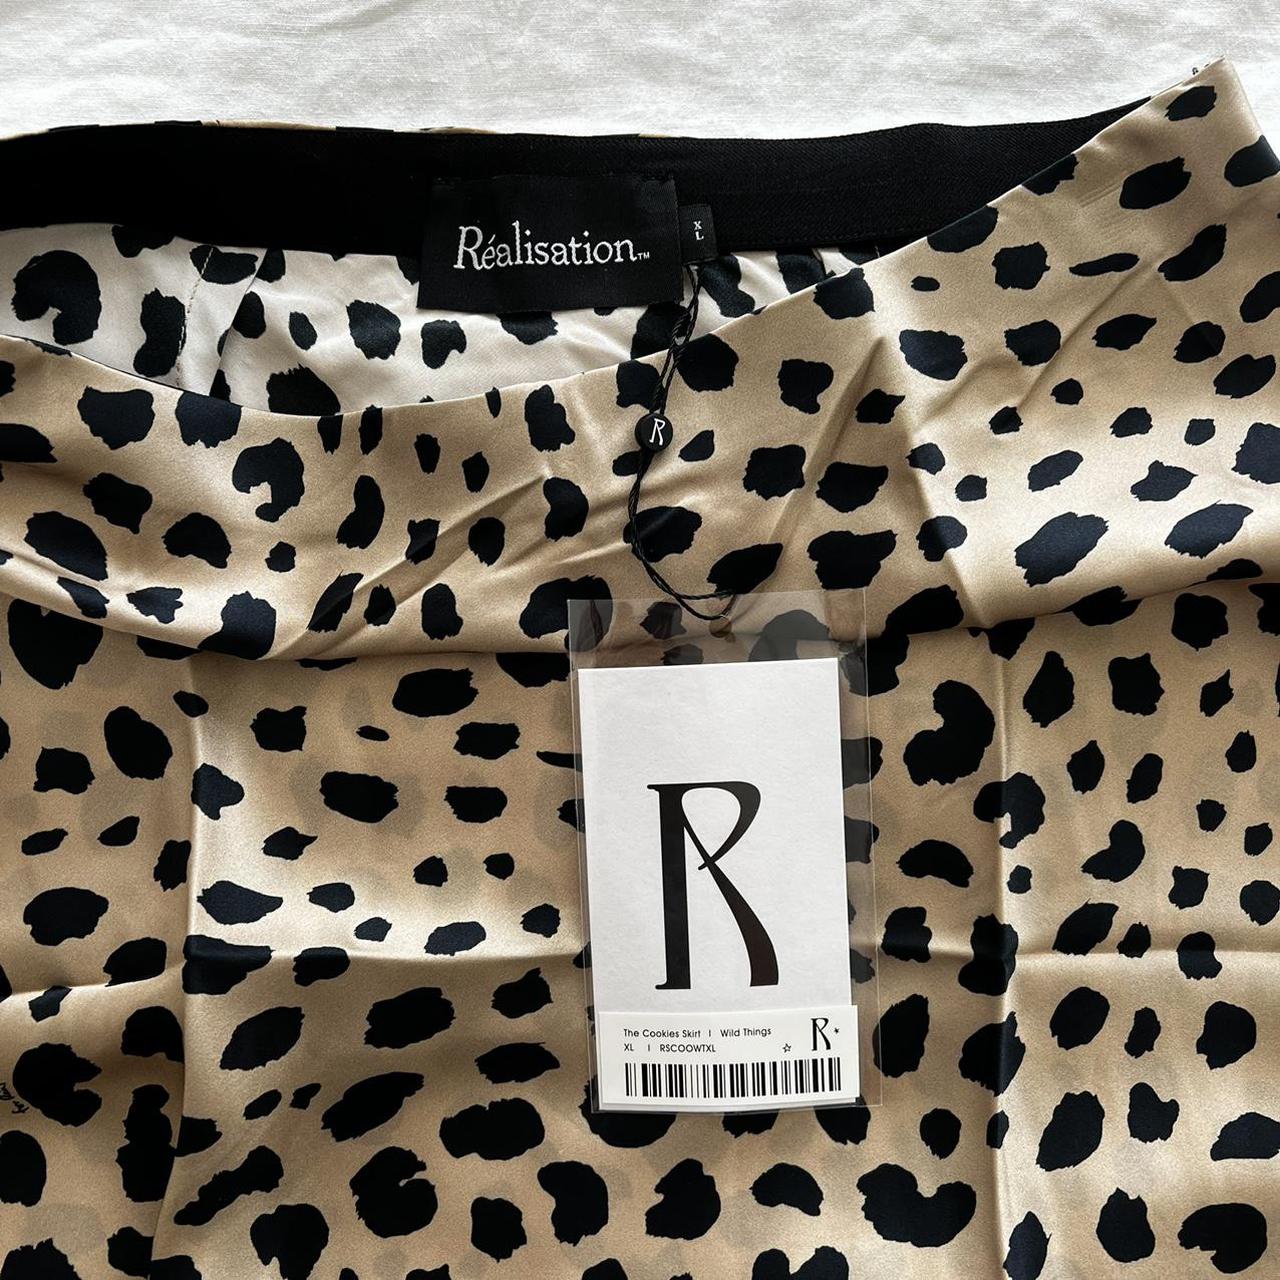 Product Image 2 - Realisation Par The Cookies skirt